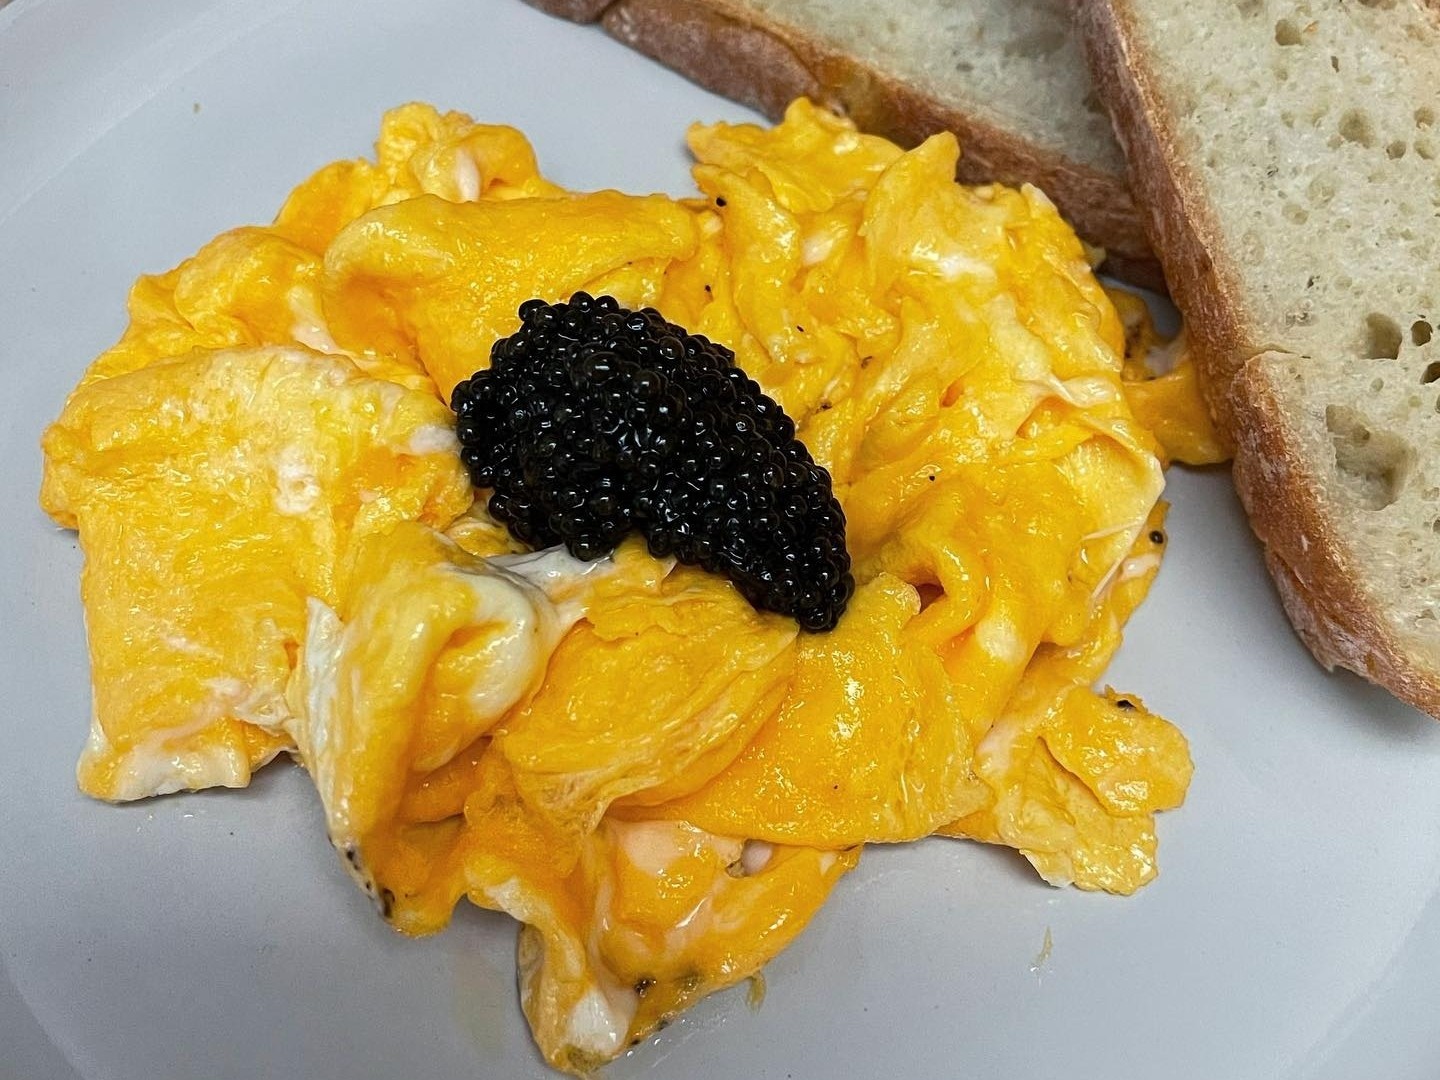 Hassle-free caviar delivery elevate any egg dish at home